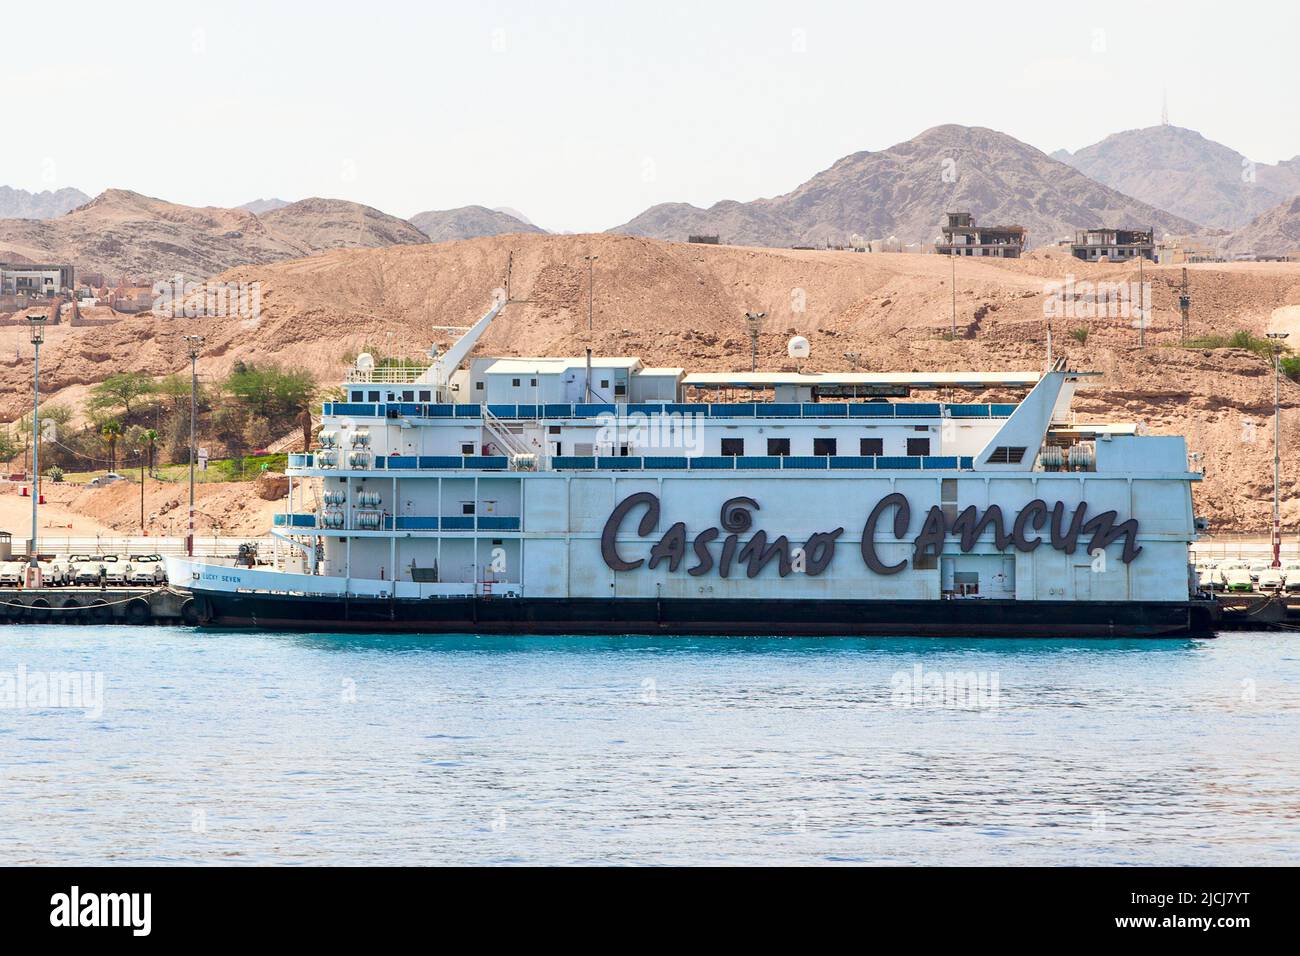 Eilat, Israel - May 22, 2009: Casino Cancun Ship meant for gambling in international waters on the berth in Eilat Stock Photo